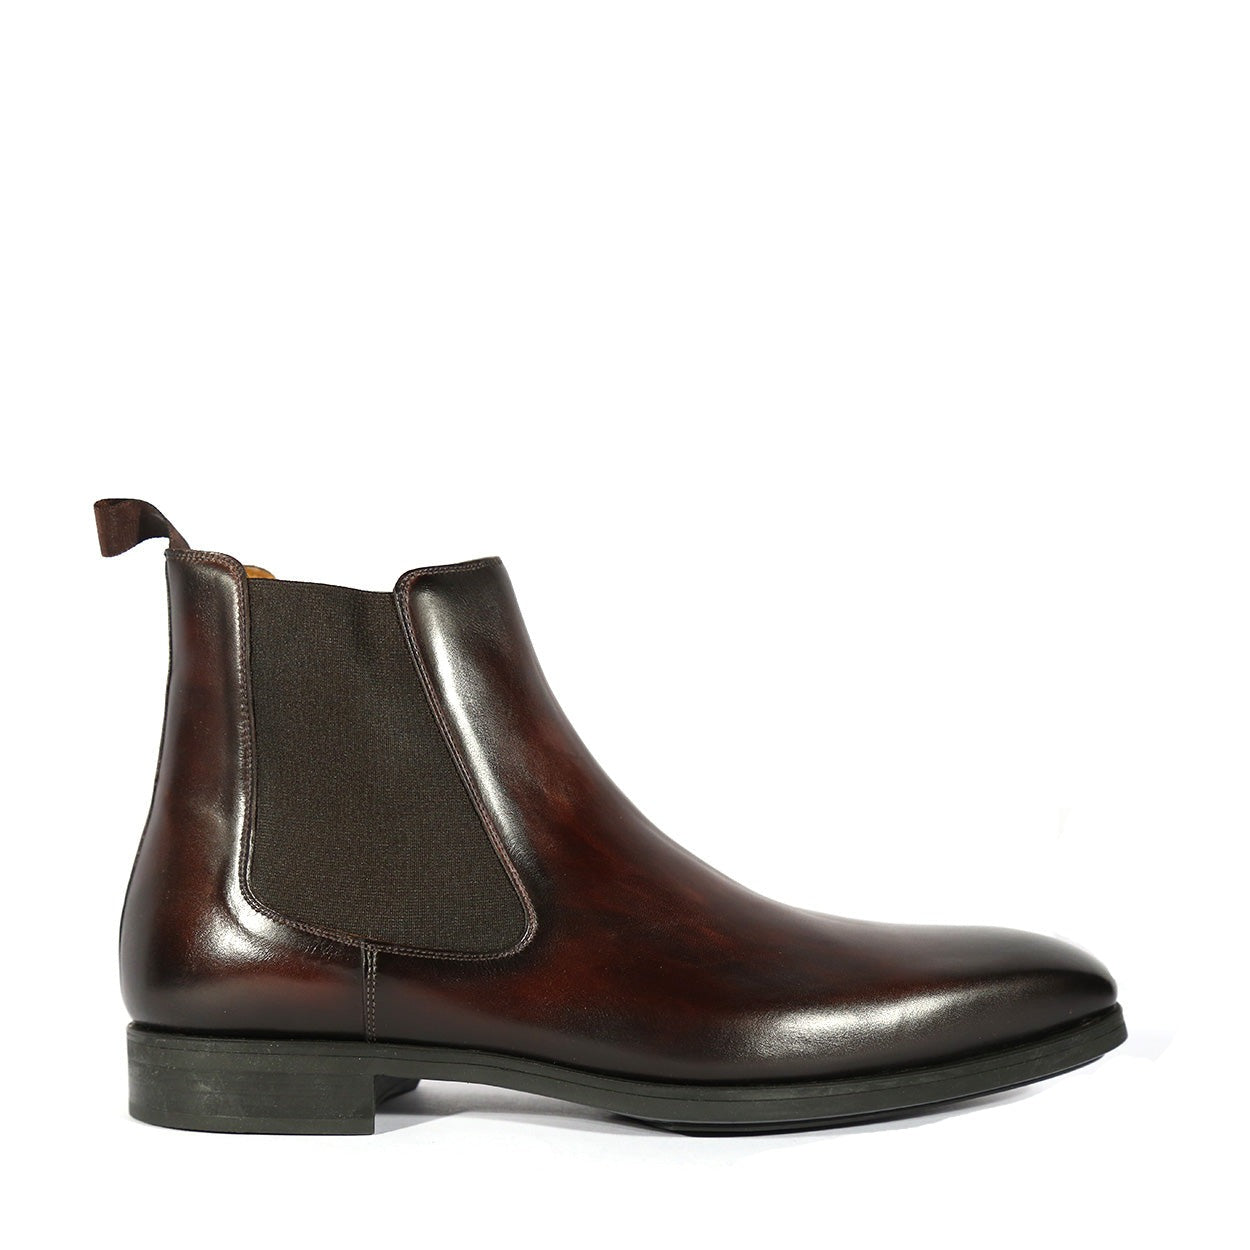 Magnanni 21139 Riley Men's Shoes Brown Calf-Skin Leather Chelsea Boots ...